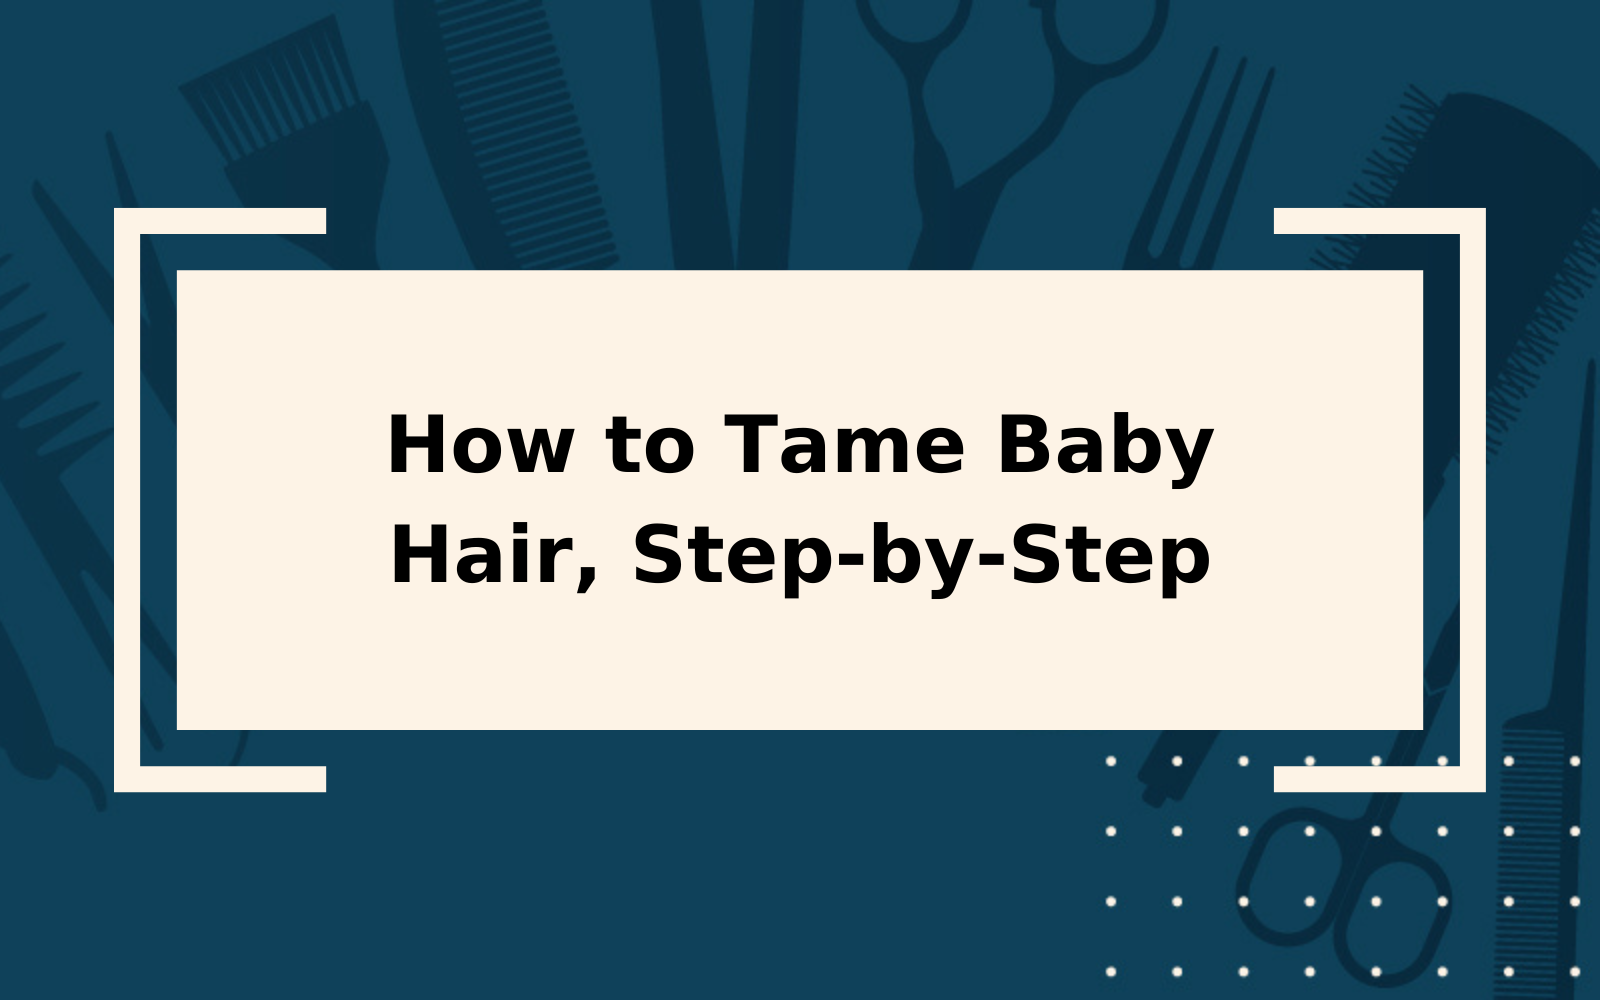 How to Tame Baby Hair | Step-by-Step Guide